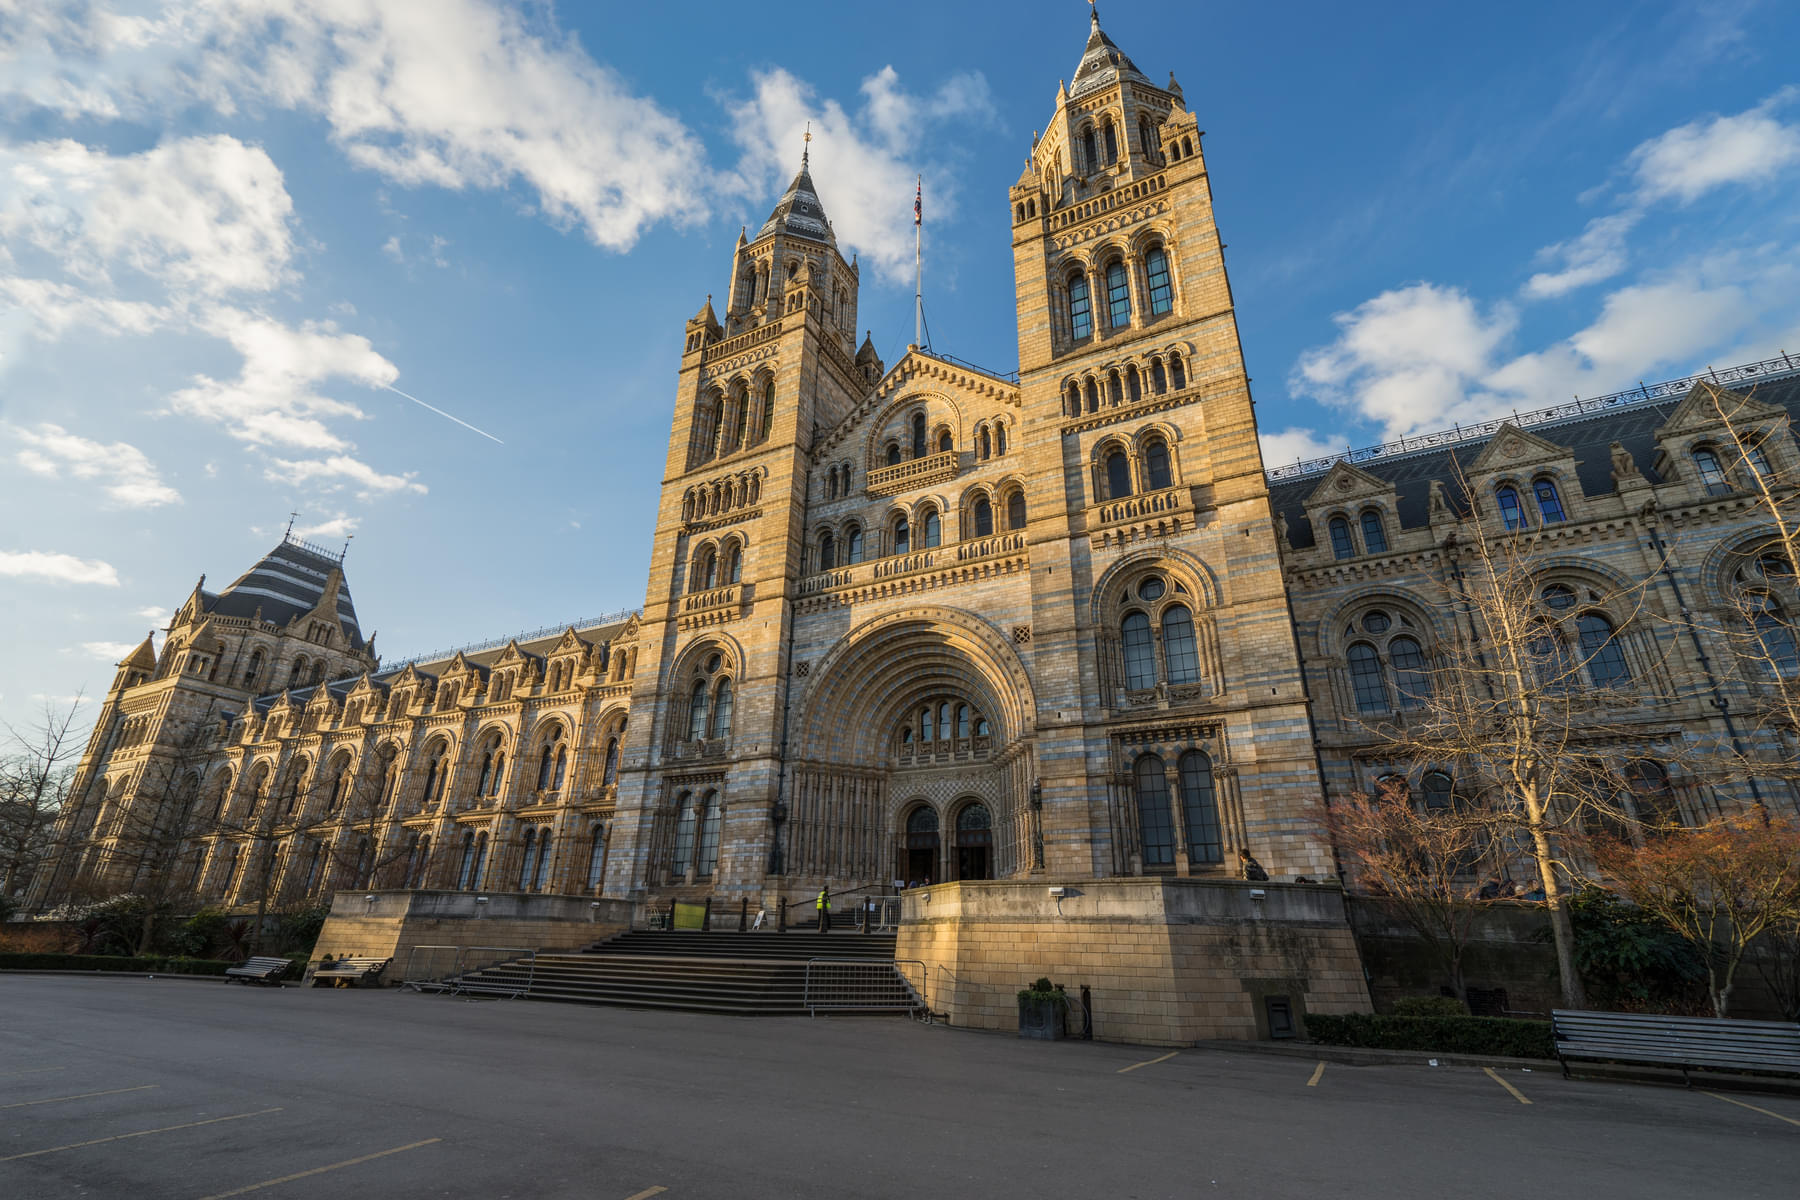 Visit Natural History Museum, a museum of natural sciences